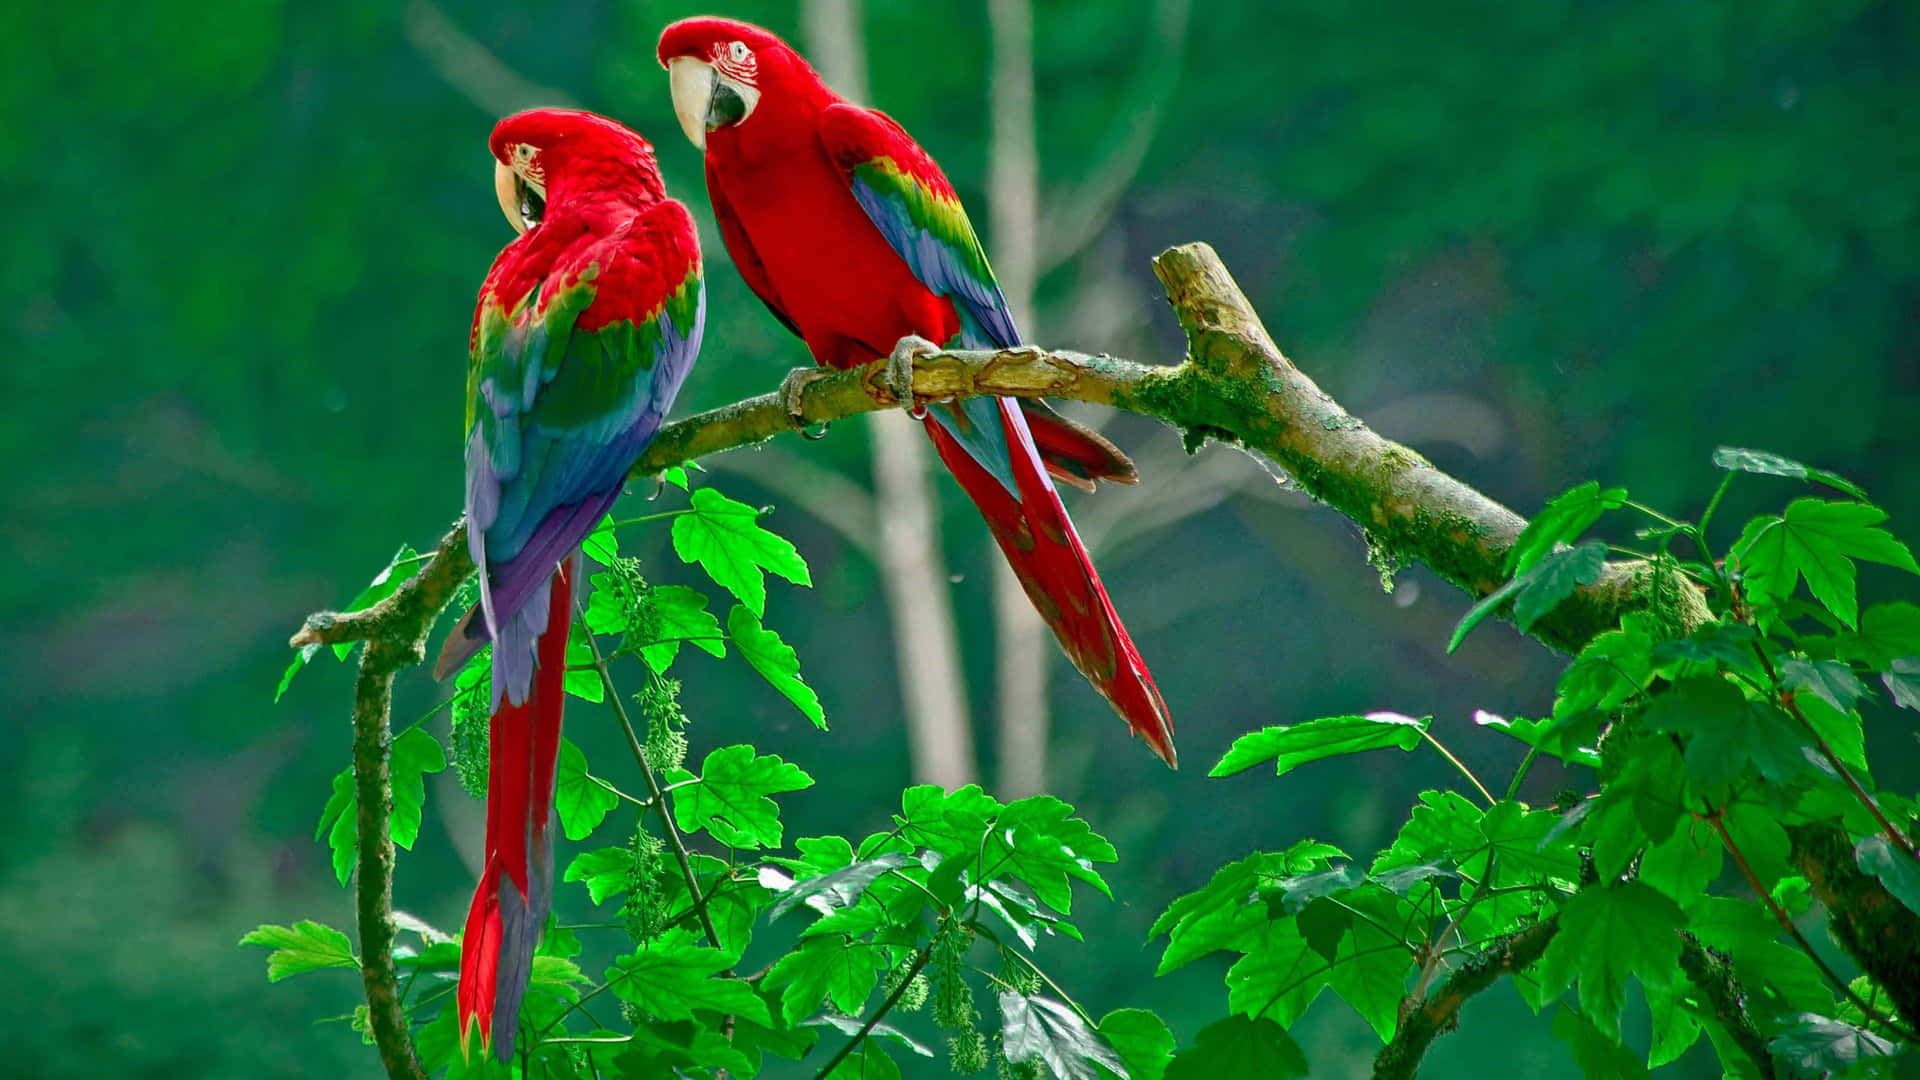 Vibrant_ Macaws_ Perched_in_ Greenery_4 K.jpg Wallpaper